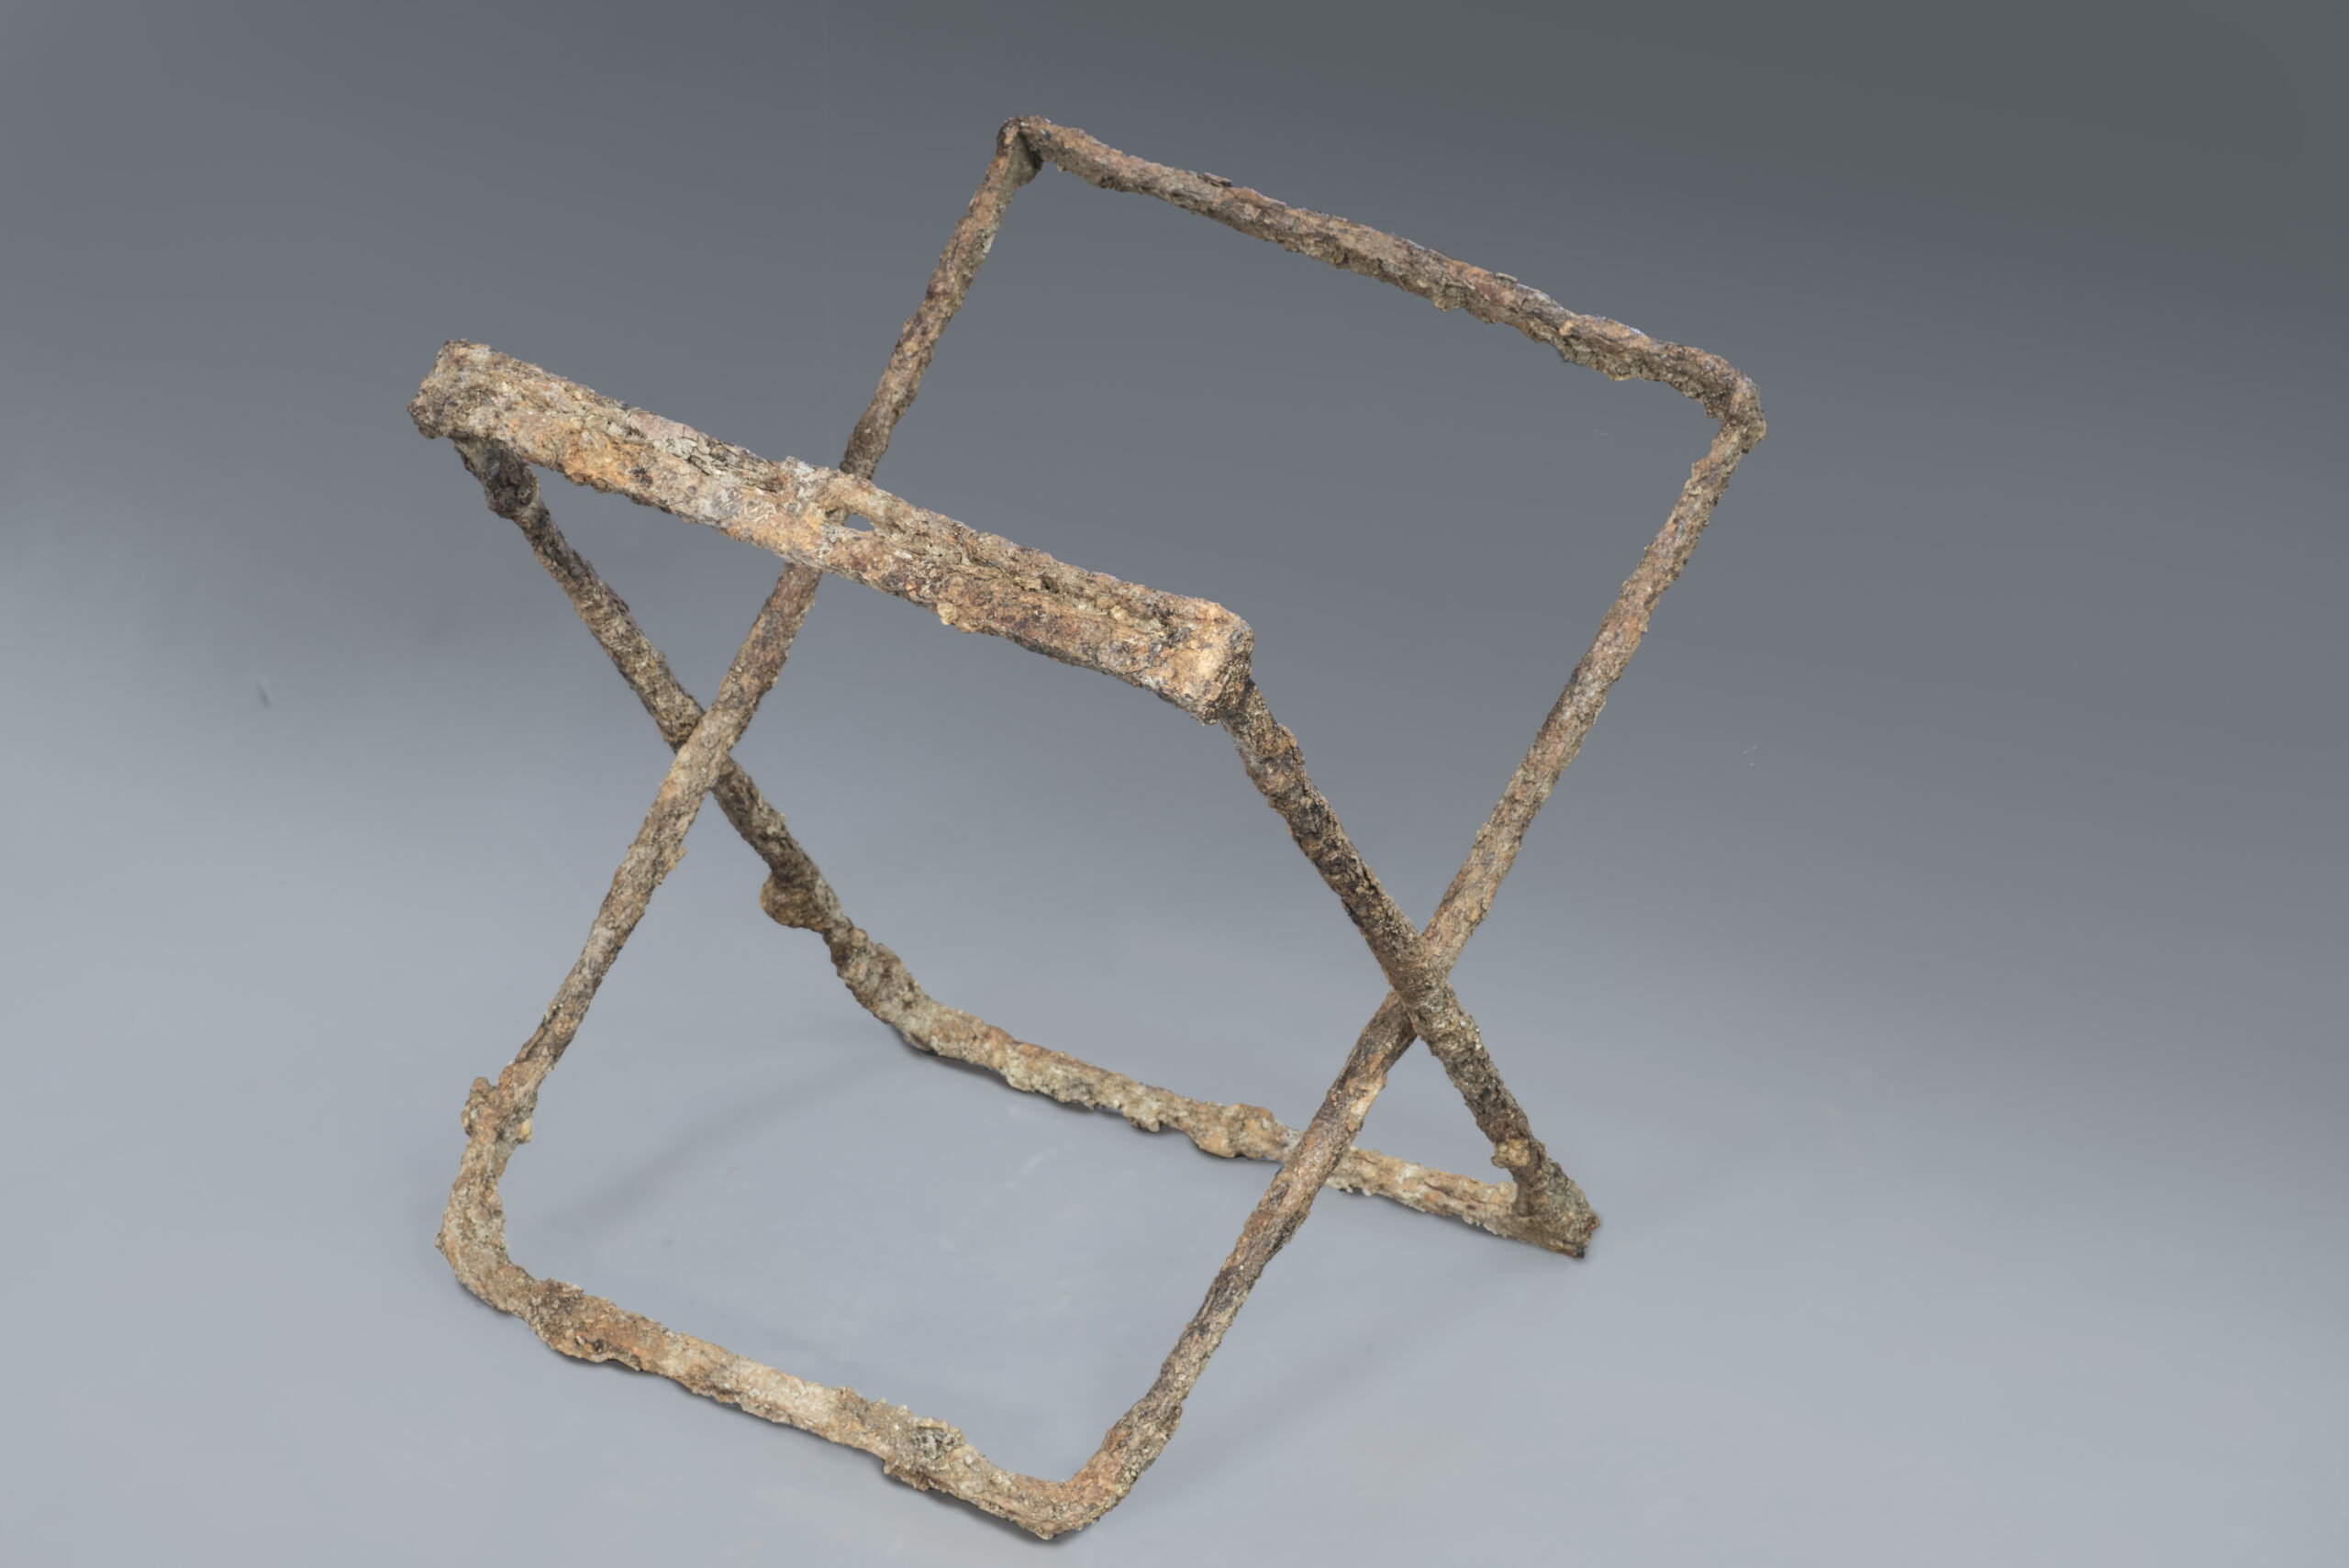 Medieval ‘folding chair’ discovered